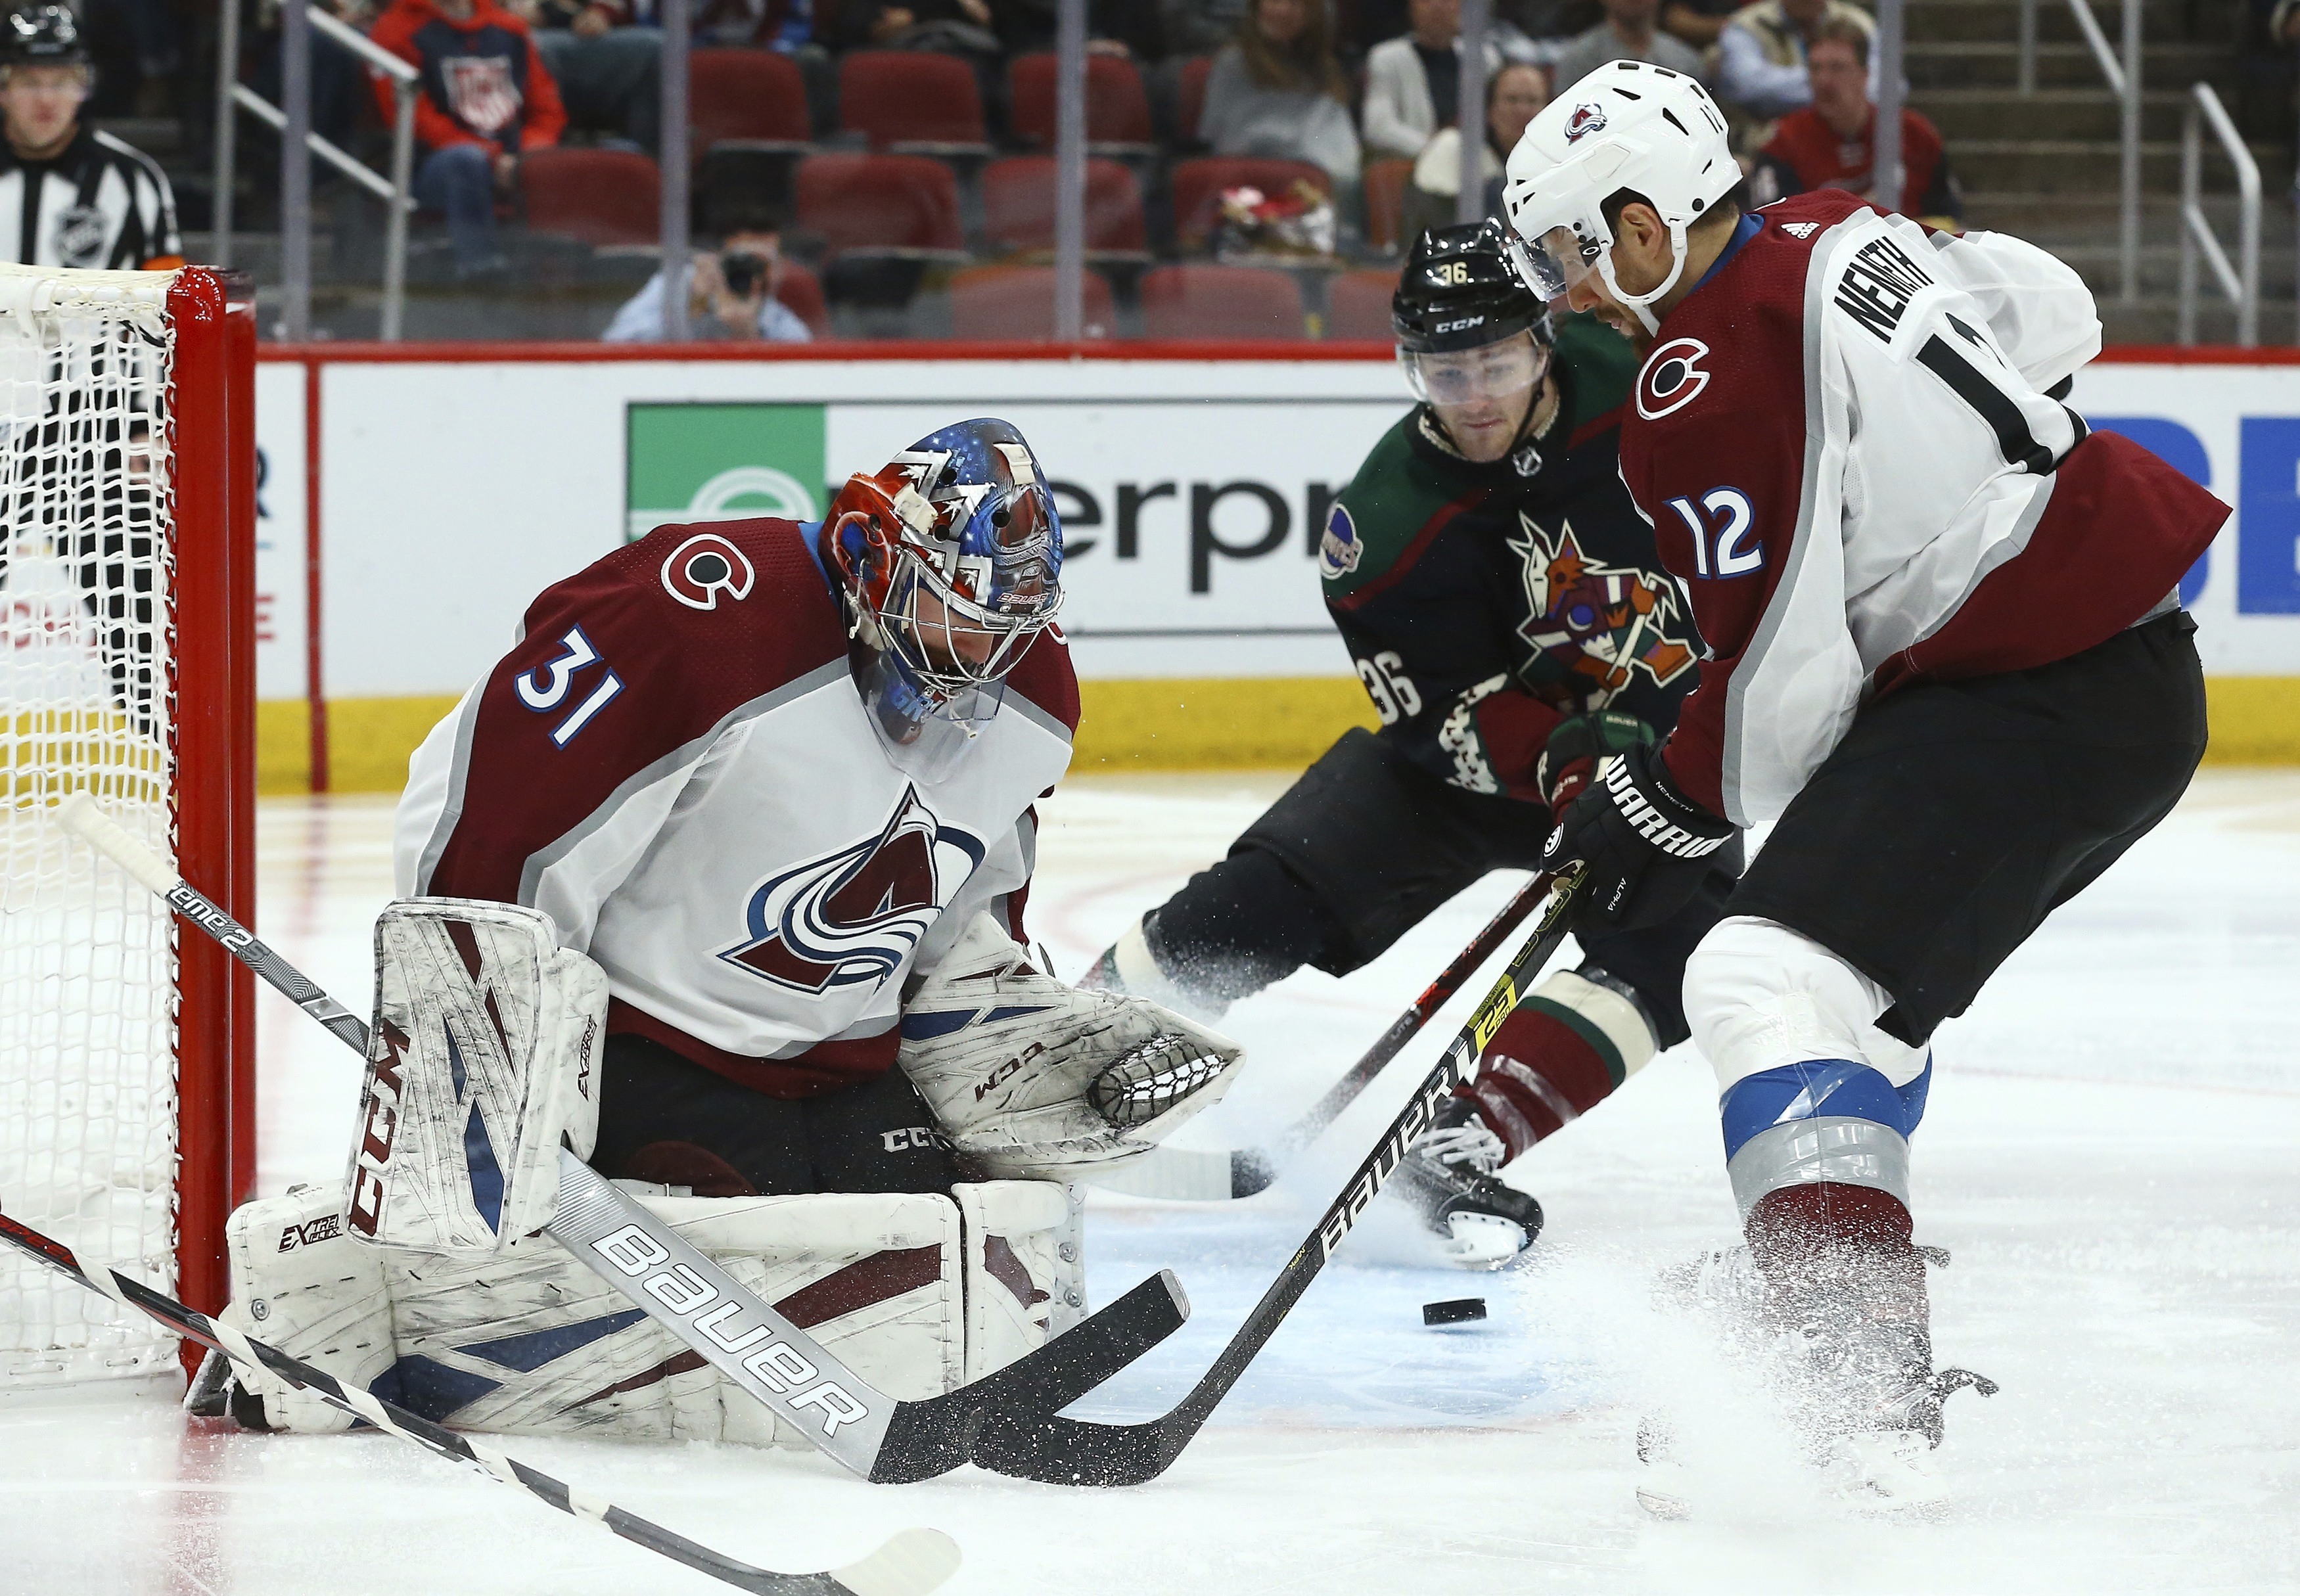 Richardson’s 2 late goals lead Coyotes past Avalanche 6-4